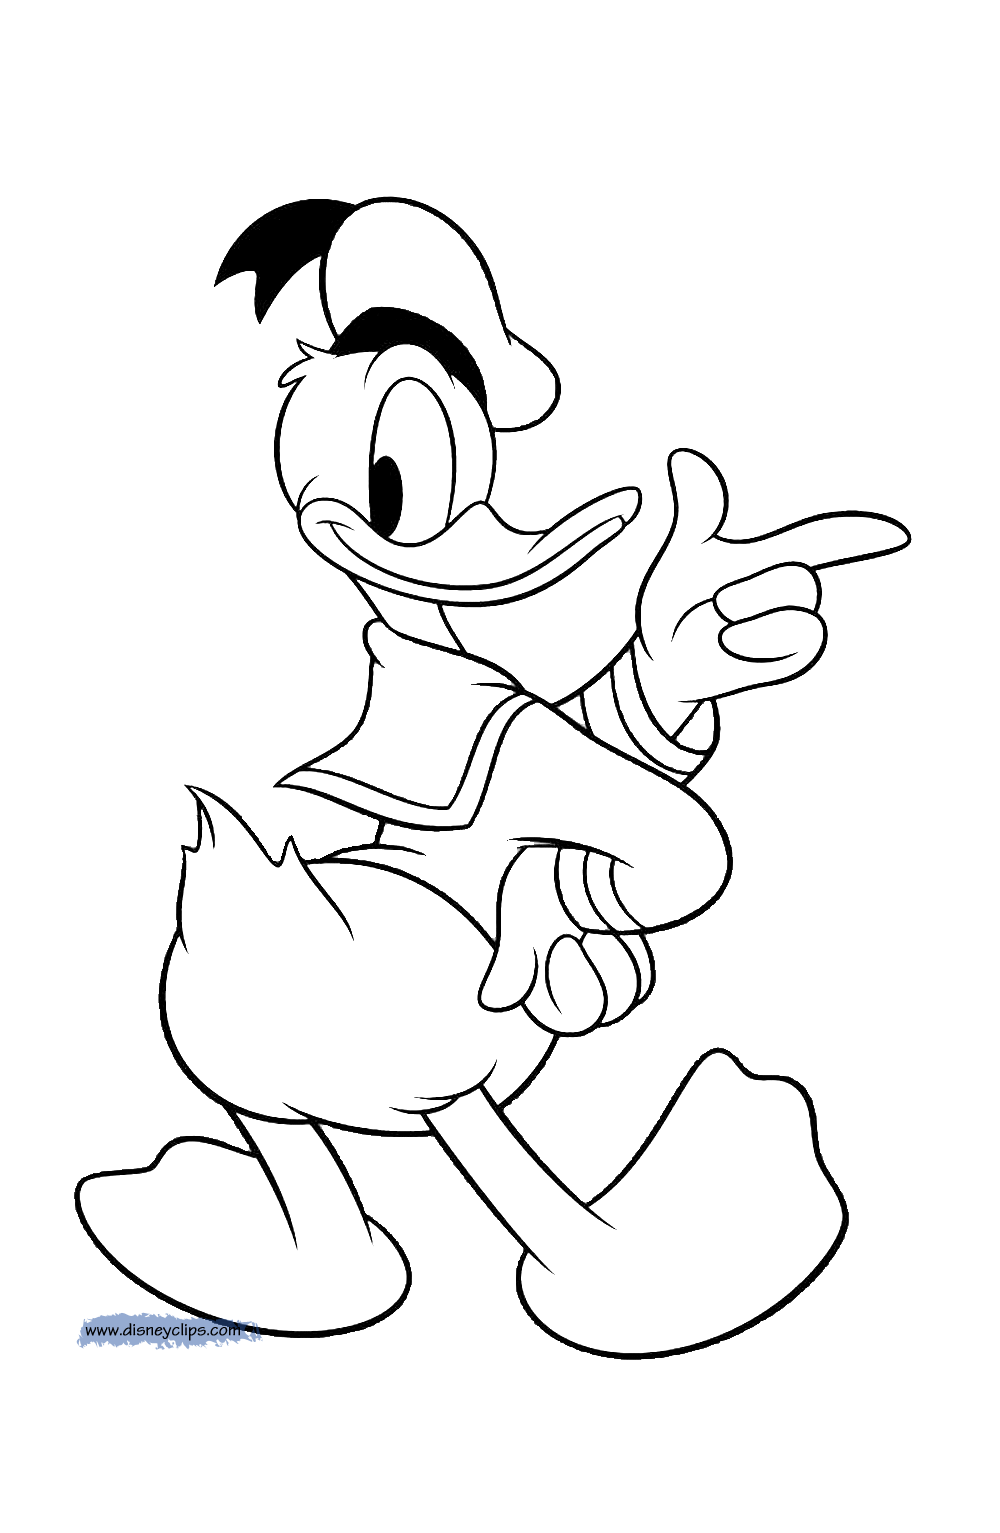 donald coloring duck pointing daisy disneyclips disney funstuff number